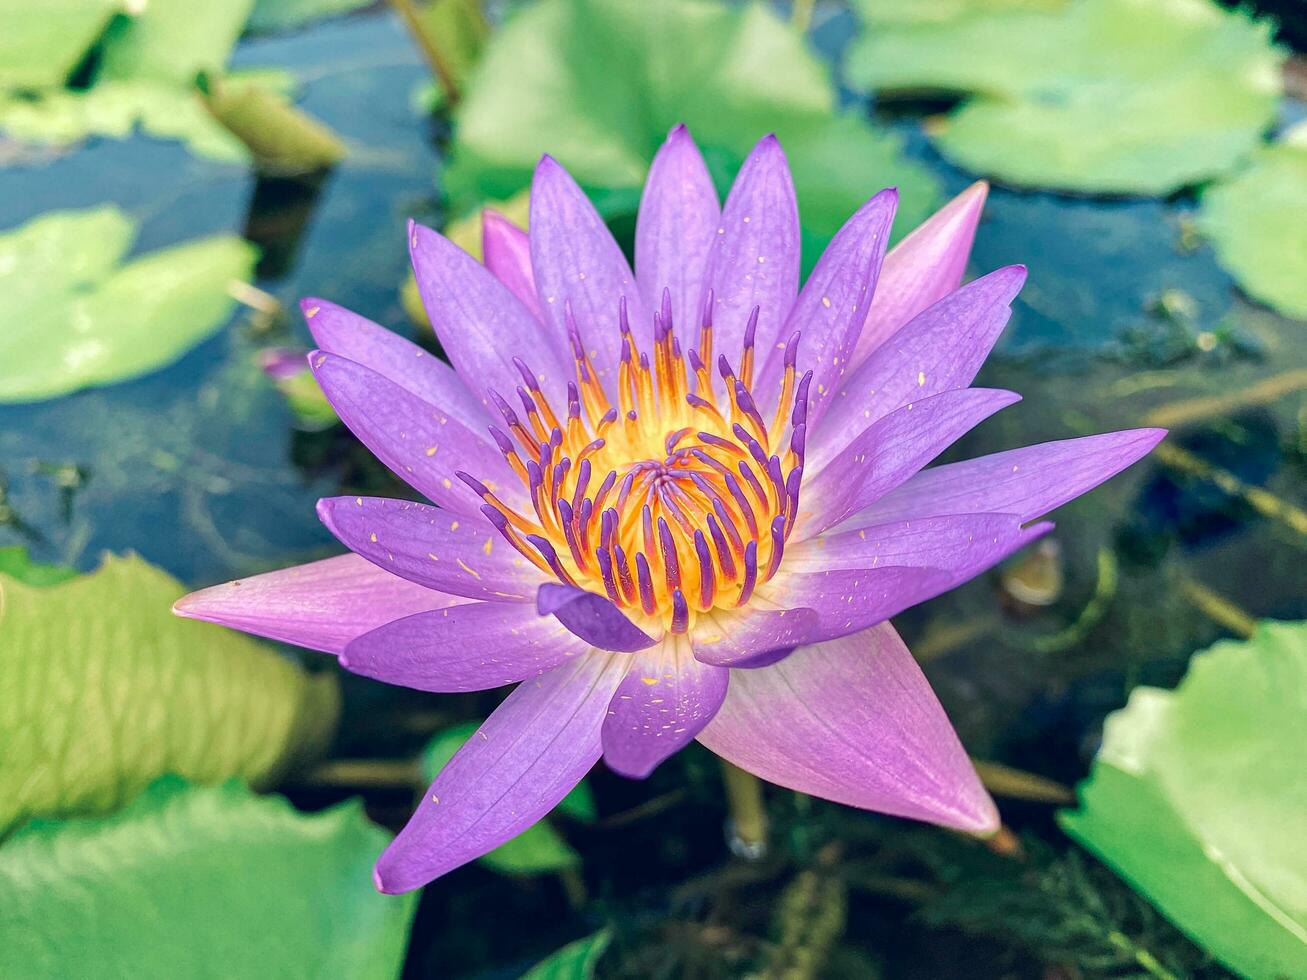 The purple water lily flower blooms in the pond, the purple water lily flower makes you feel rested, the purple water lily flower gives you the feeling of being in nature. landscape background photo